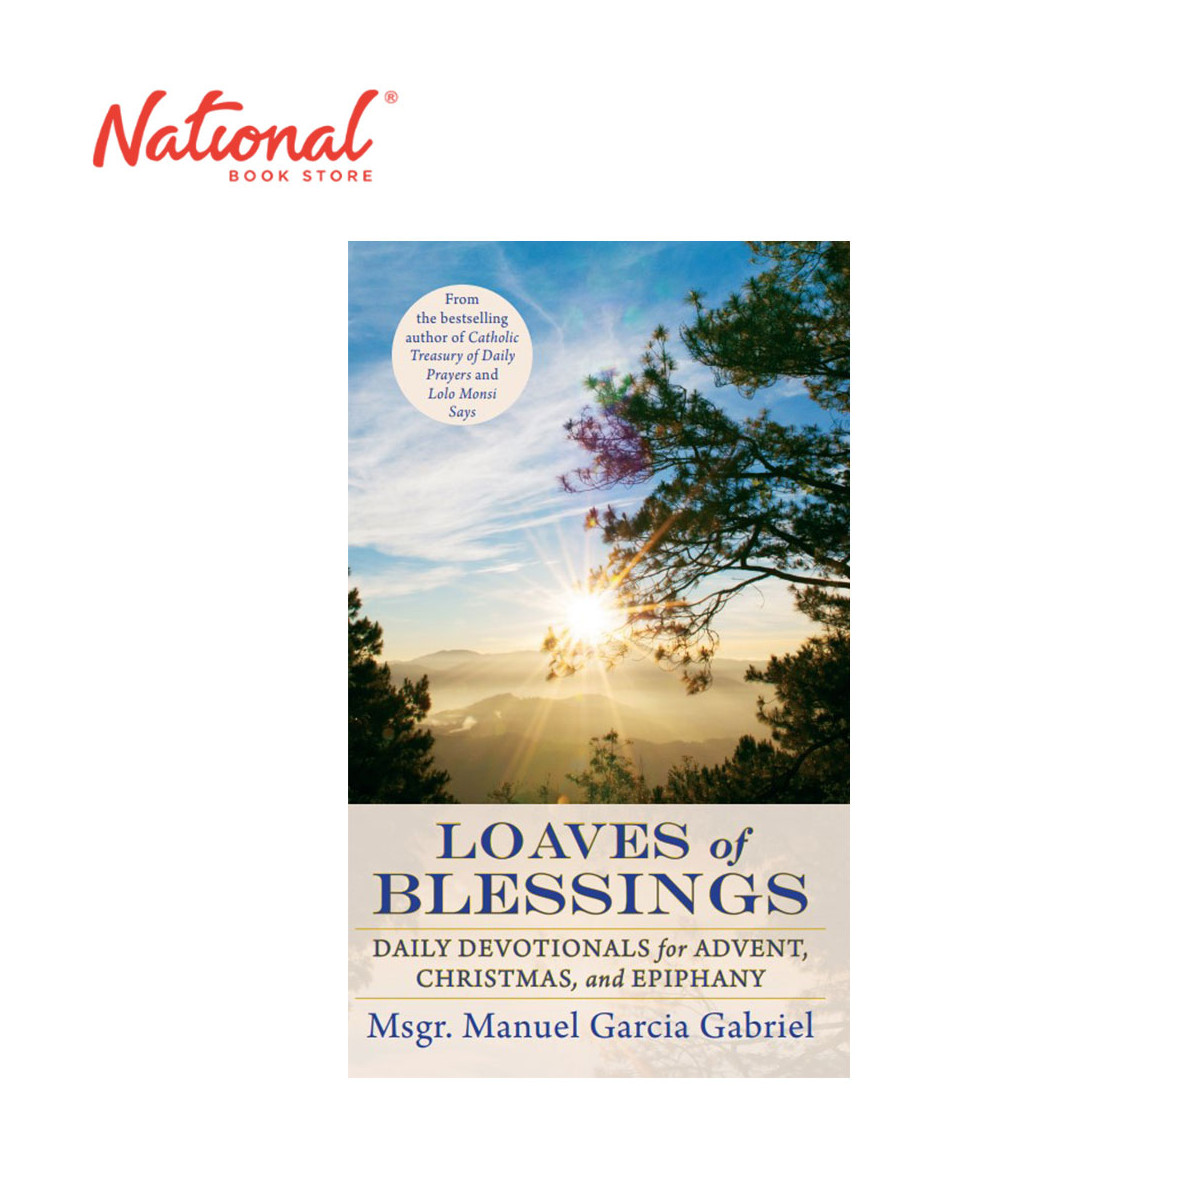 Loaves of Blessings by Msgr. Manuel Gabriel Garcia - Trade Paperback - Non-Fiction - Inspirational